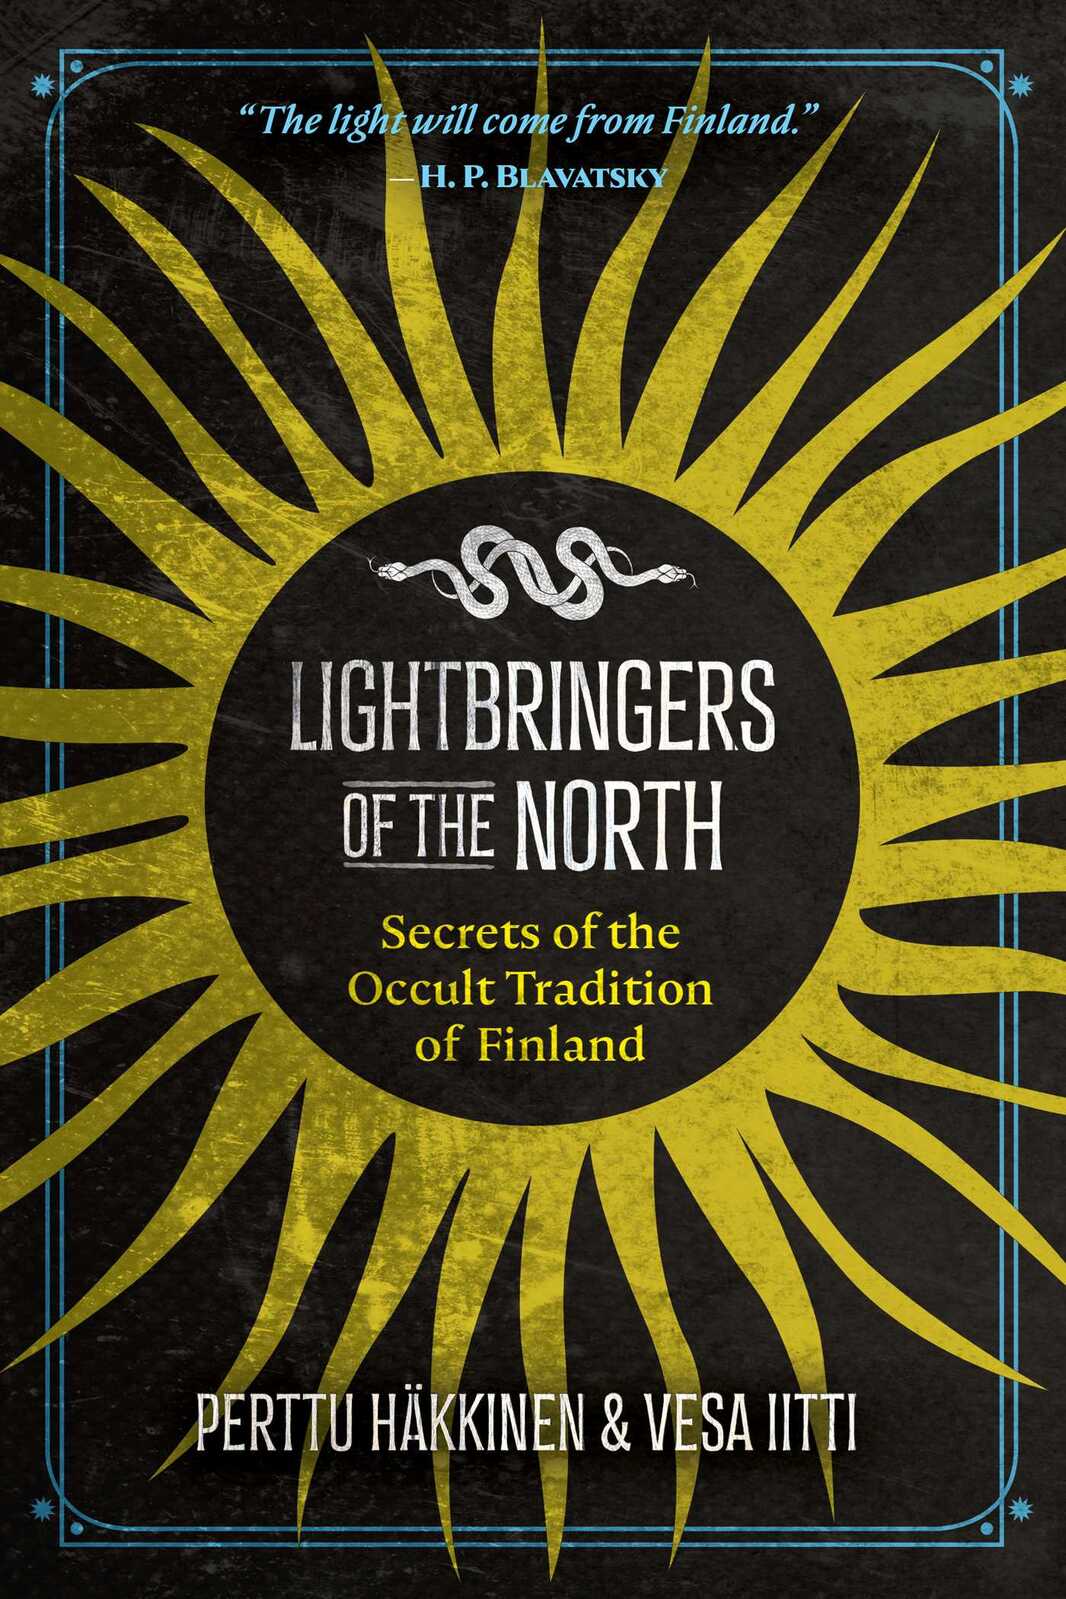 Lightbringers of the North: Secrets of the Occult Tradition of Finland